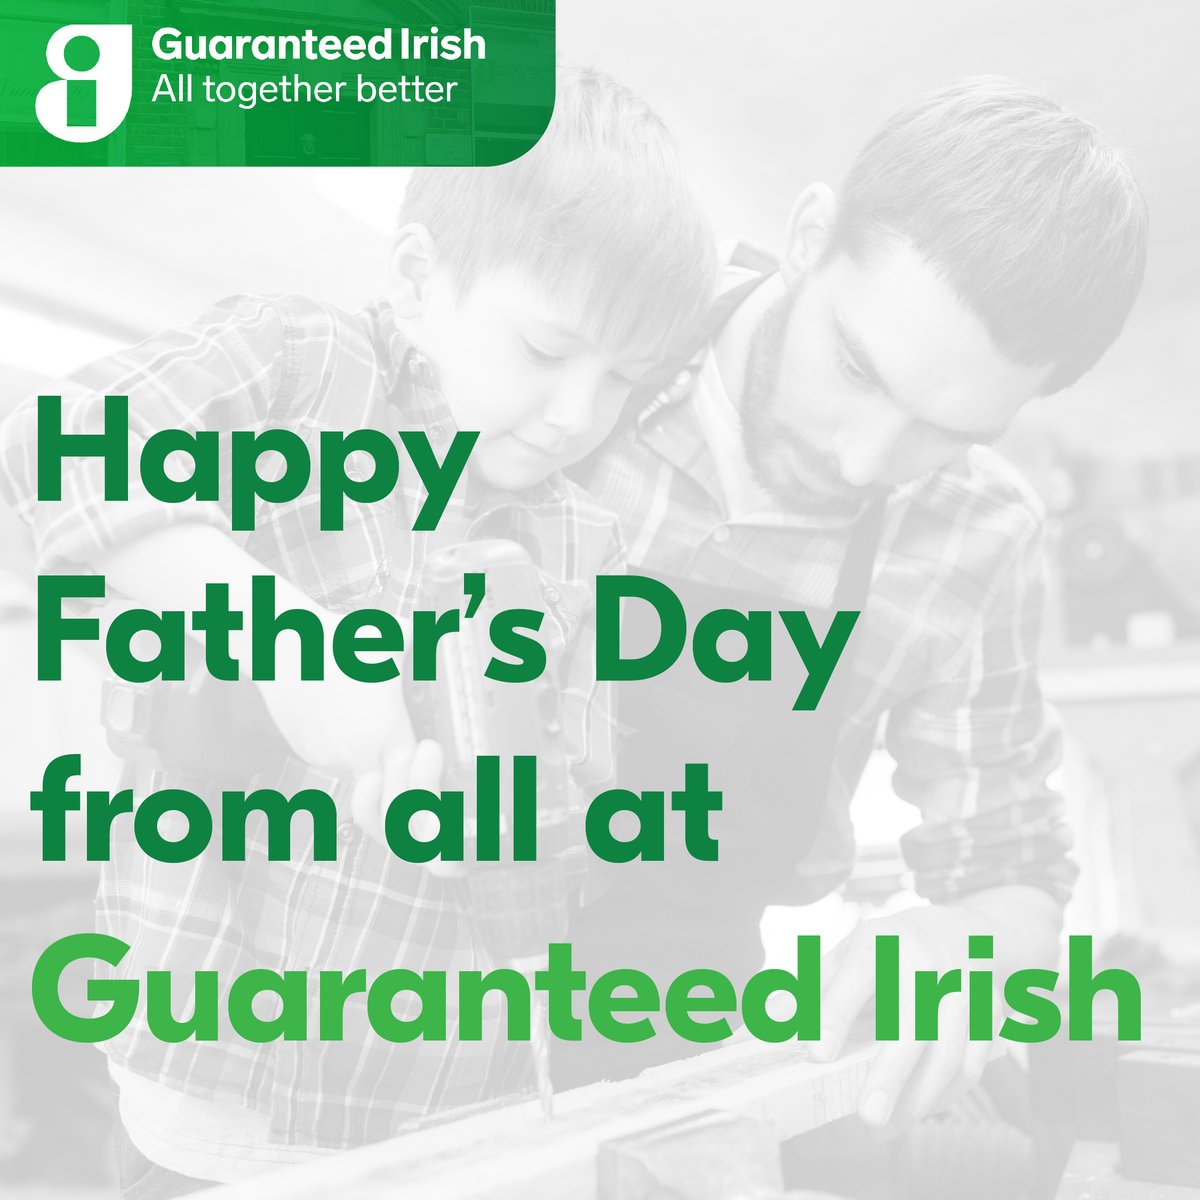 Happy Father’s Day from all of us here at Guaranteed Irish!

I hope you were all spoiled… and perhaps received a gift or two from loved ones that shopped with Guaranteed Irish Gifts

#fathersday #guaranteedirish #guaranteedirishgifts